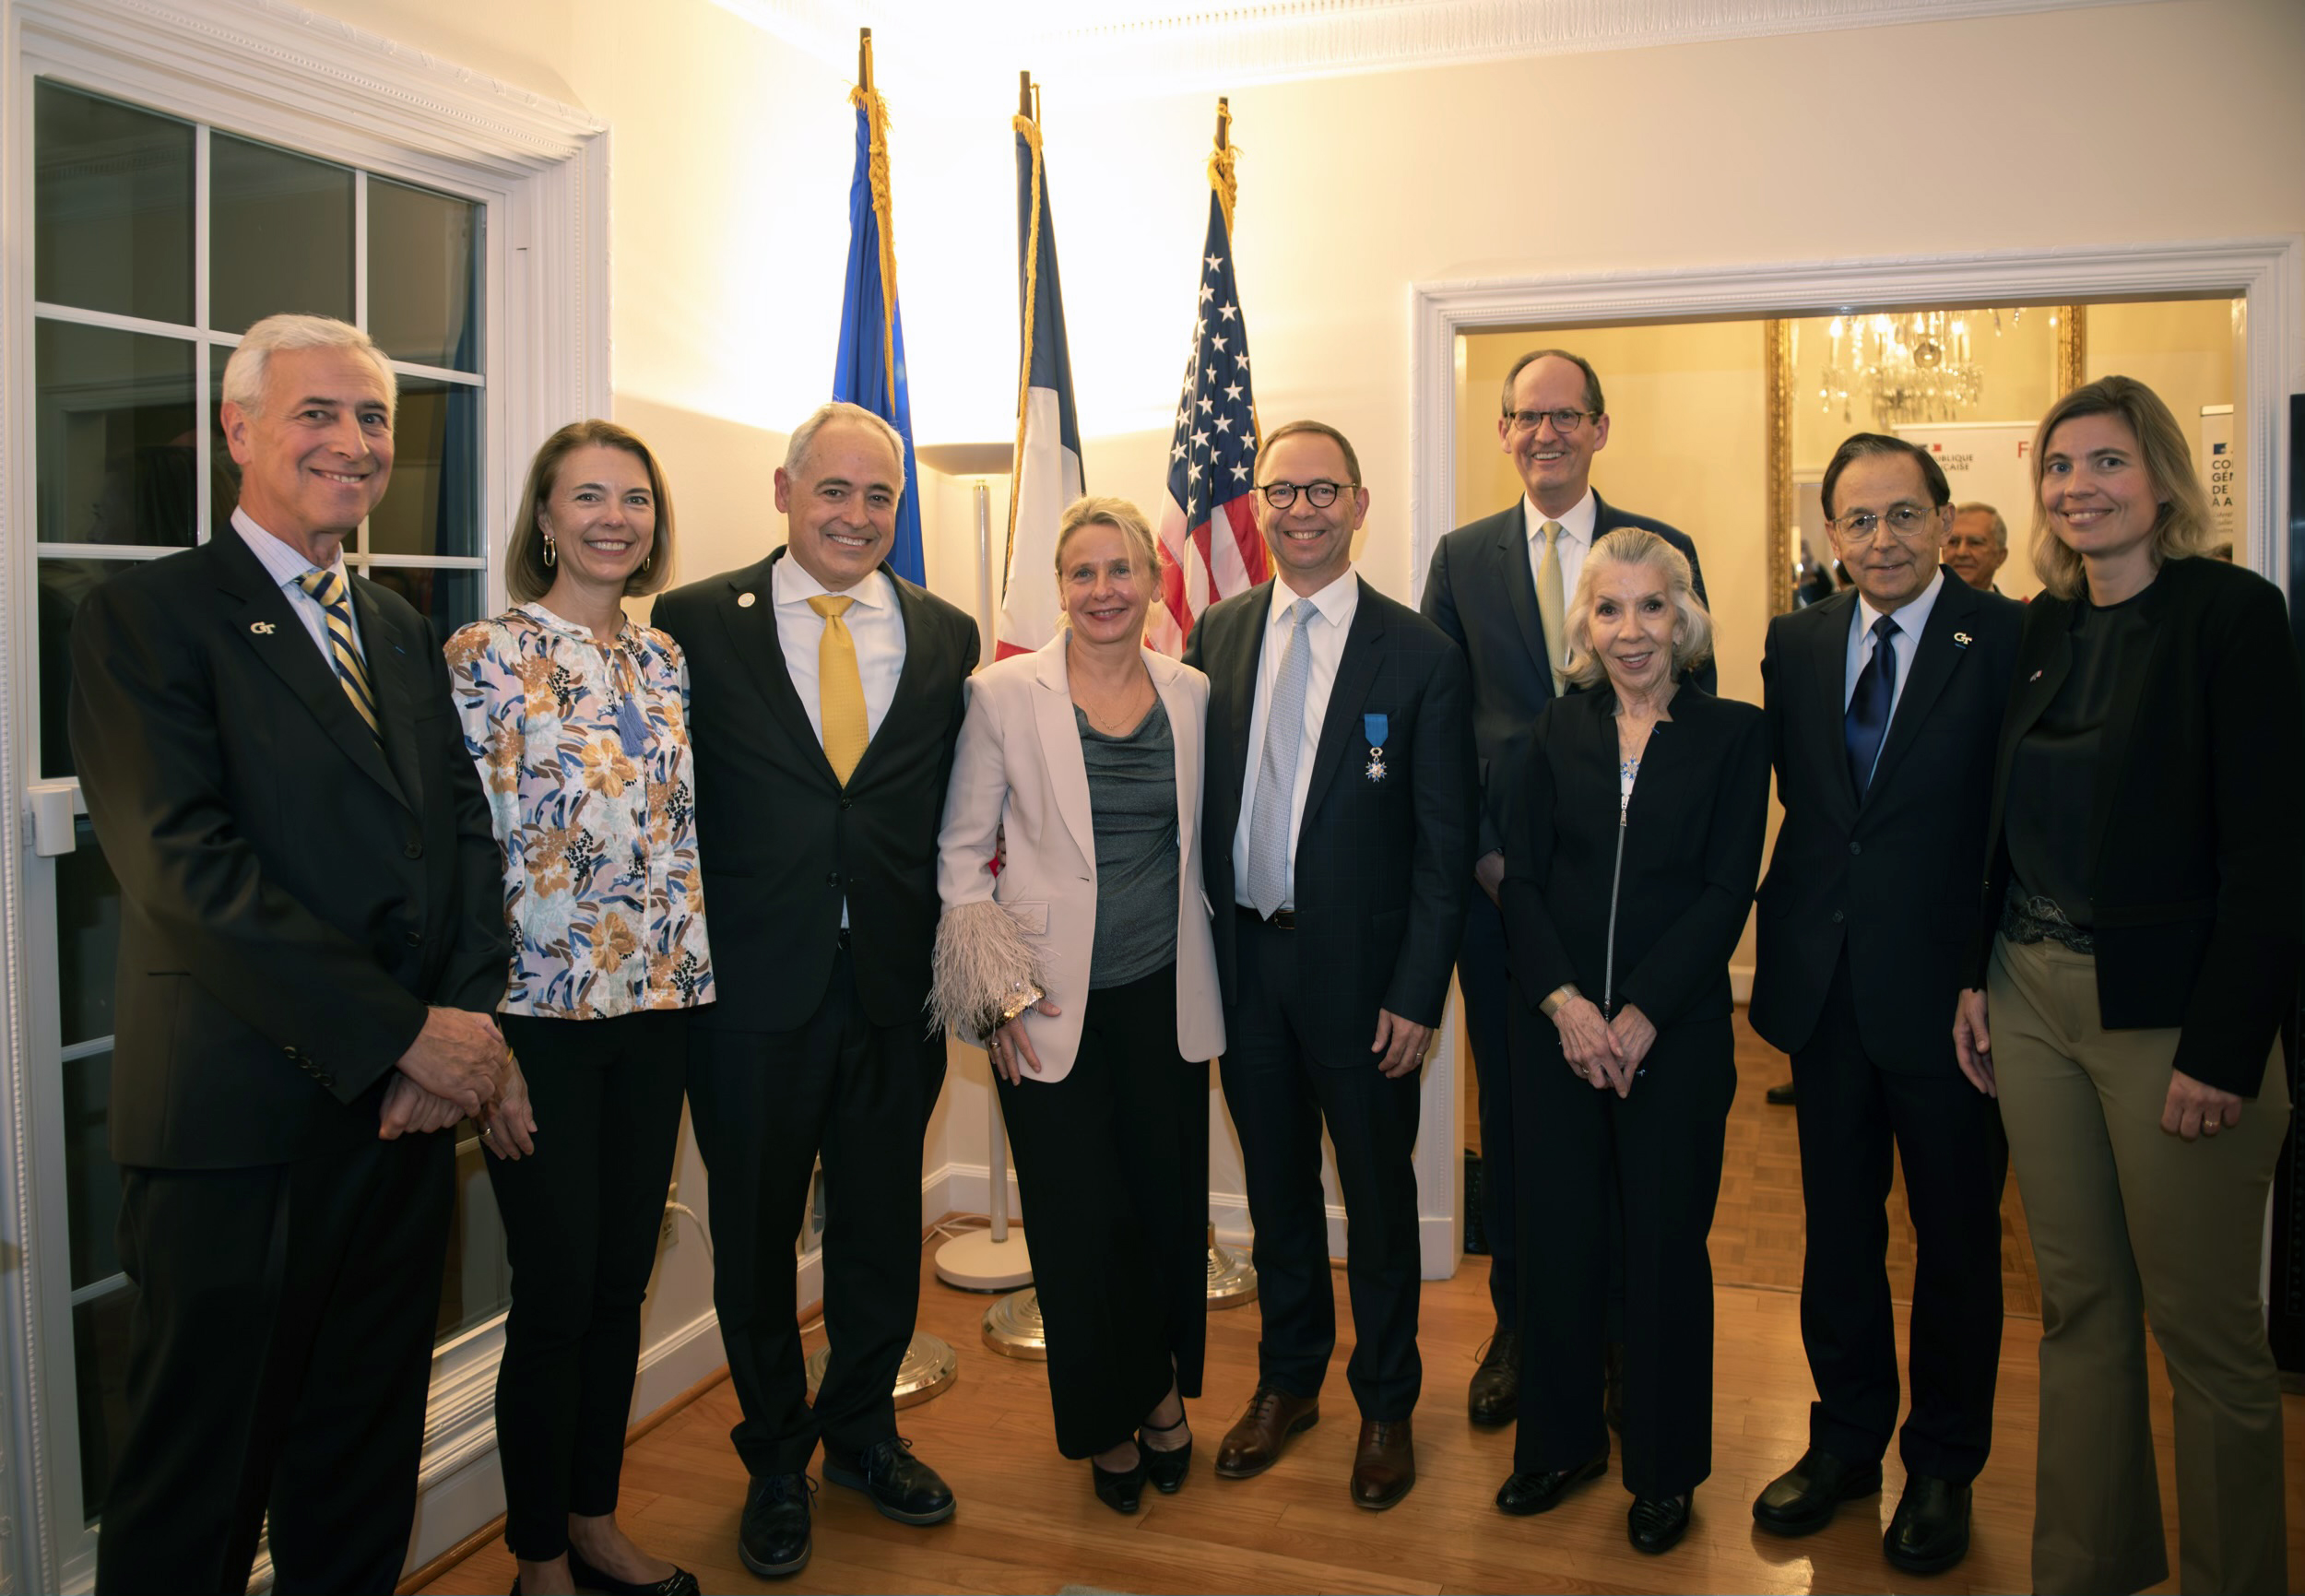 Bernard Kippelen receiving the Knight of the French National Order of Merit on Nov. 6, 2023 at the Residence of France in Atlanta. In the photo are (L-R): Yves Berthelot, Beth Cabrera, Ángel Cabrera, Virginie Kippelen, Bernard Kippelen, Steve McLaughlin, Marta H. Garcia, John McIntyre, and Anne-Laure Desjonquères. 